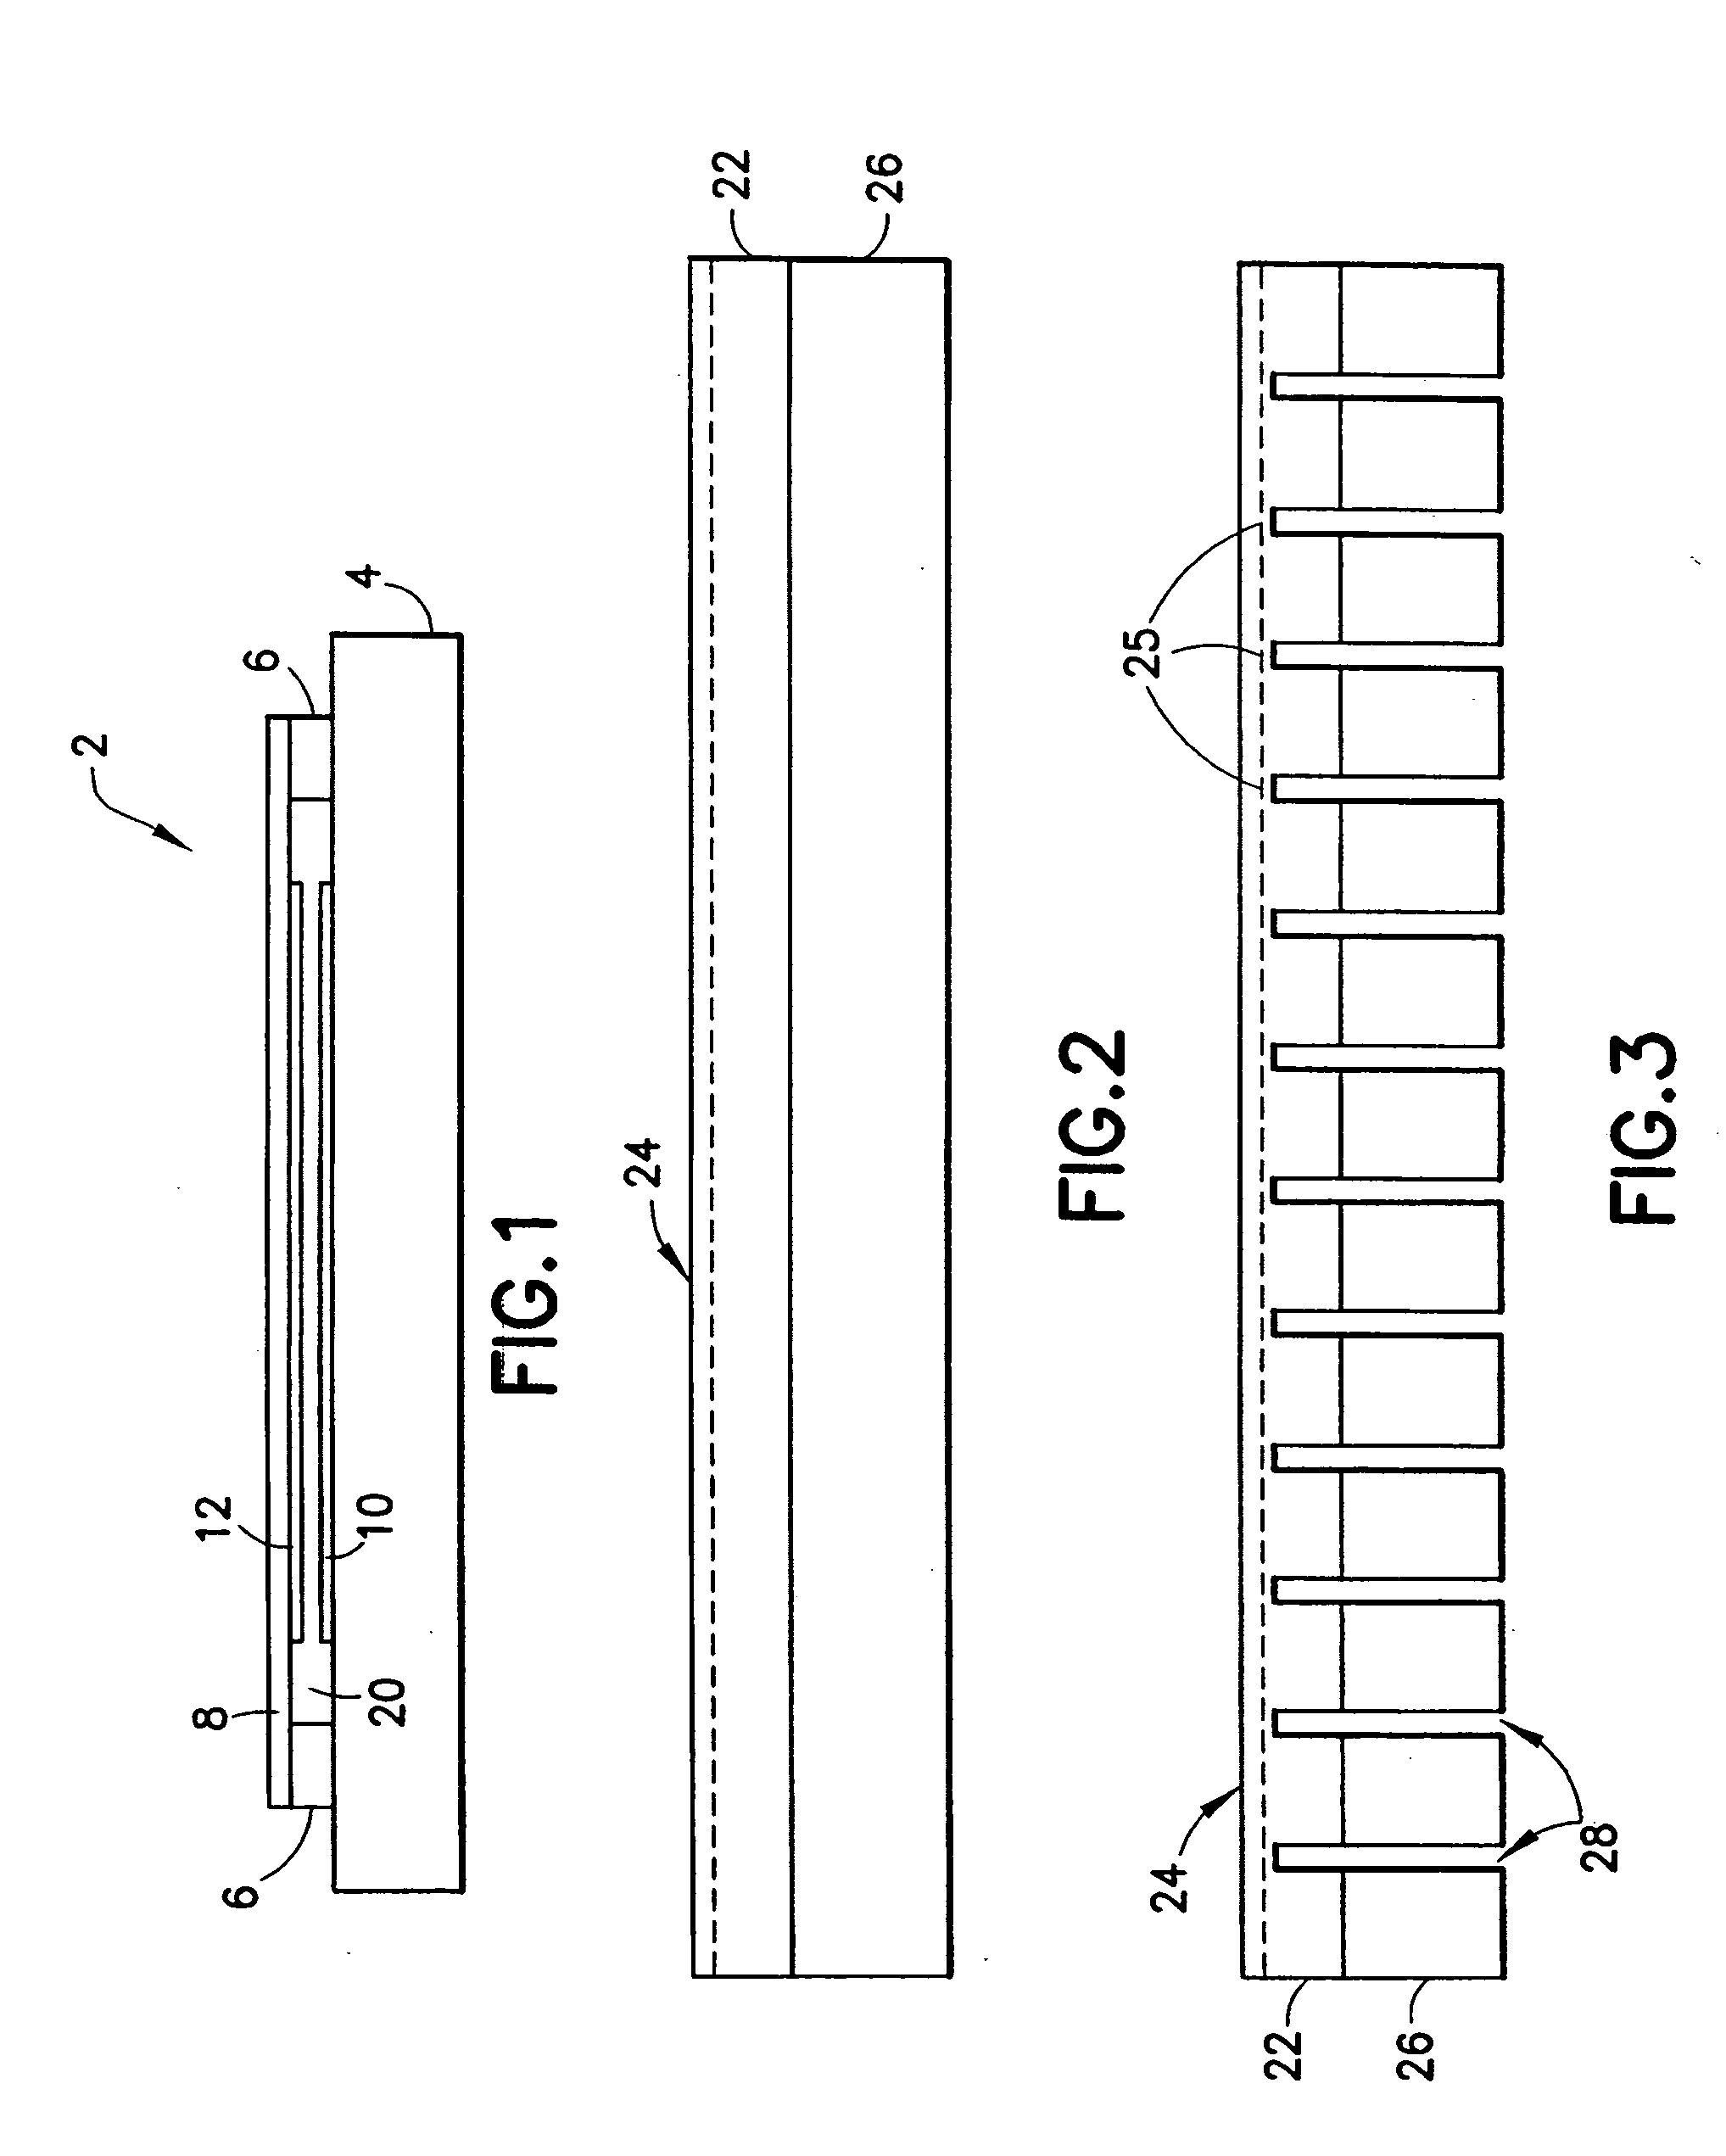 Curved micromachined ultrasonic transducer arrays and related methods of manufacture